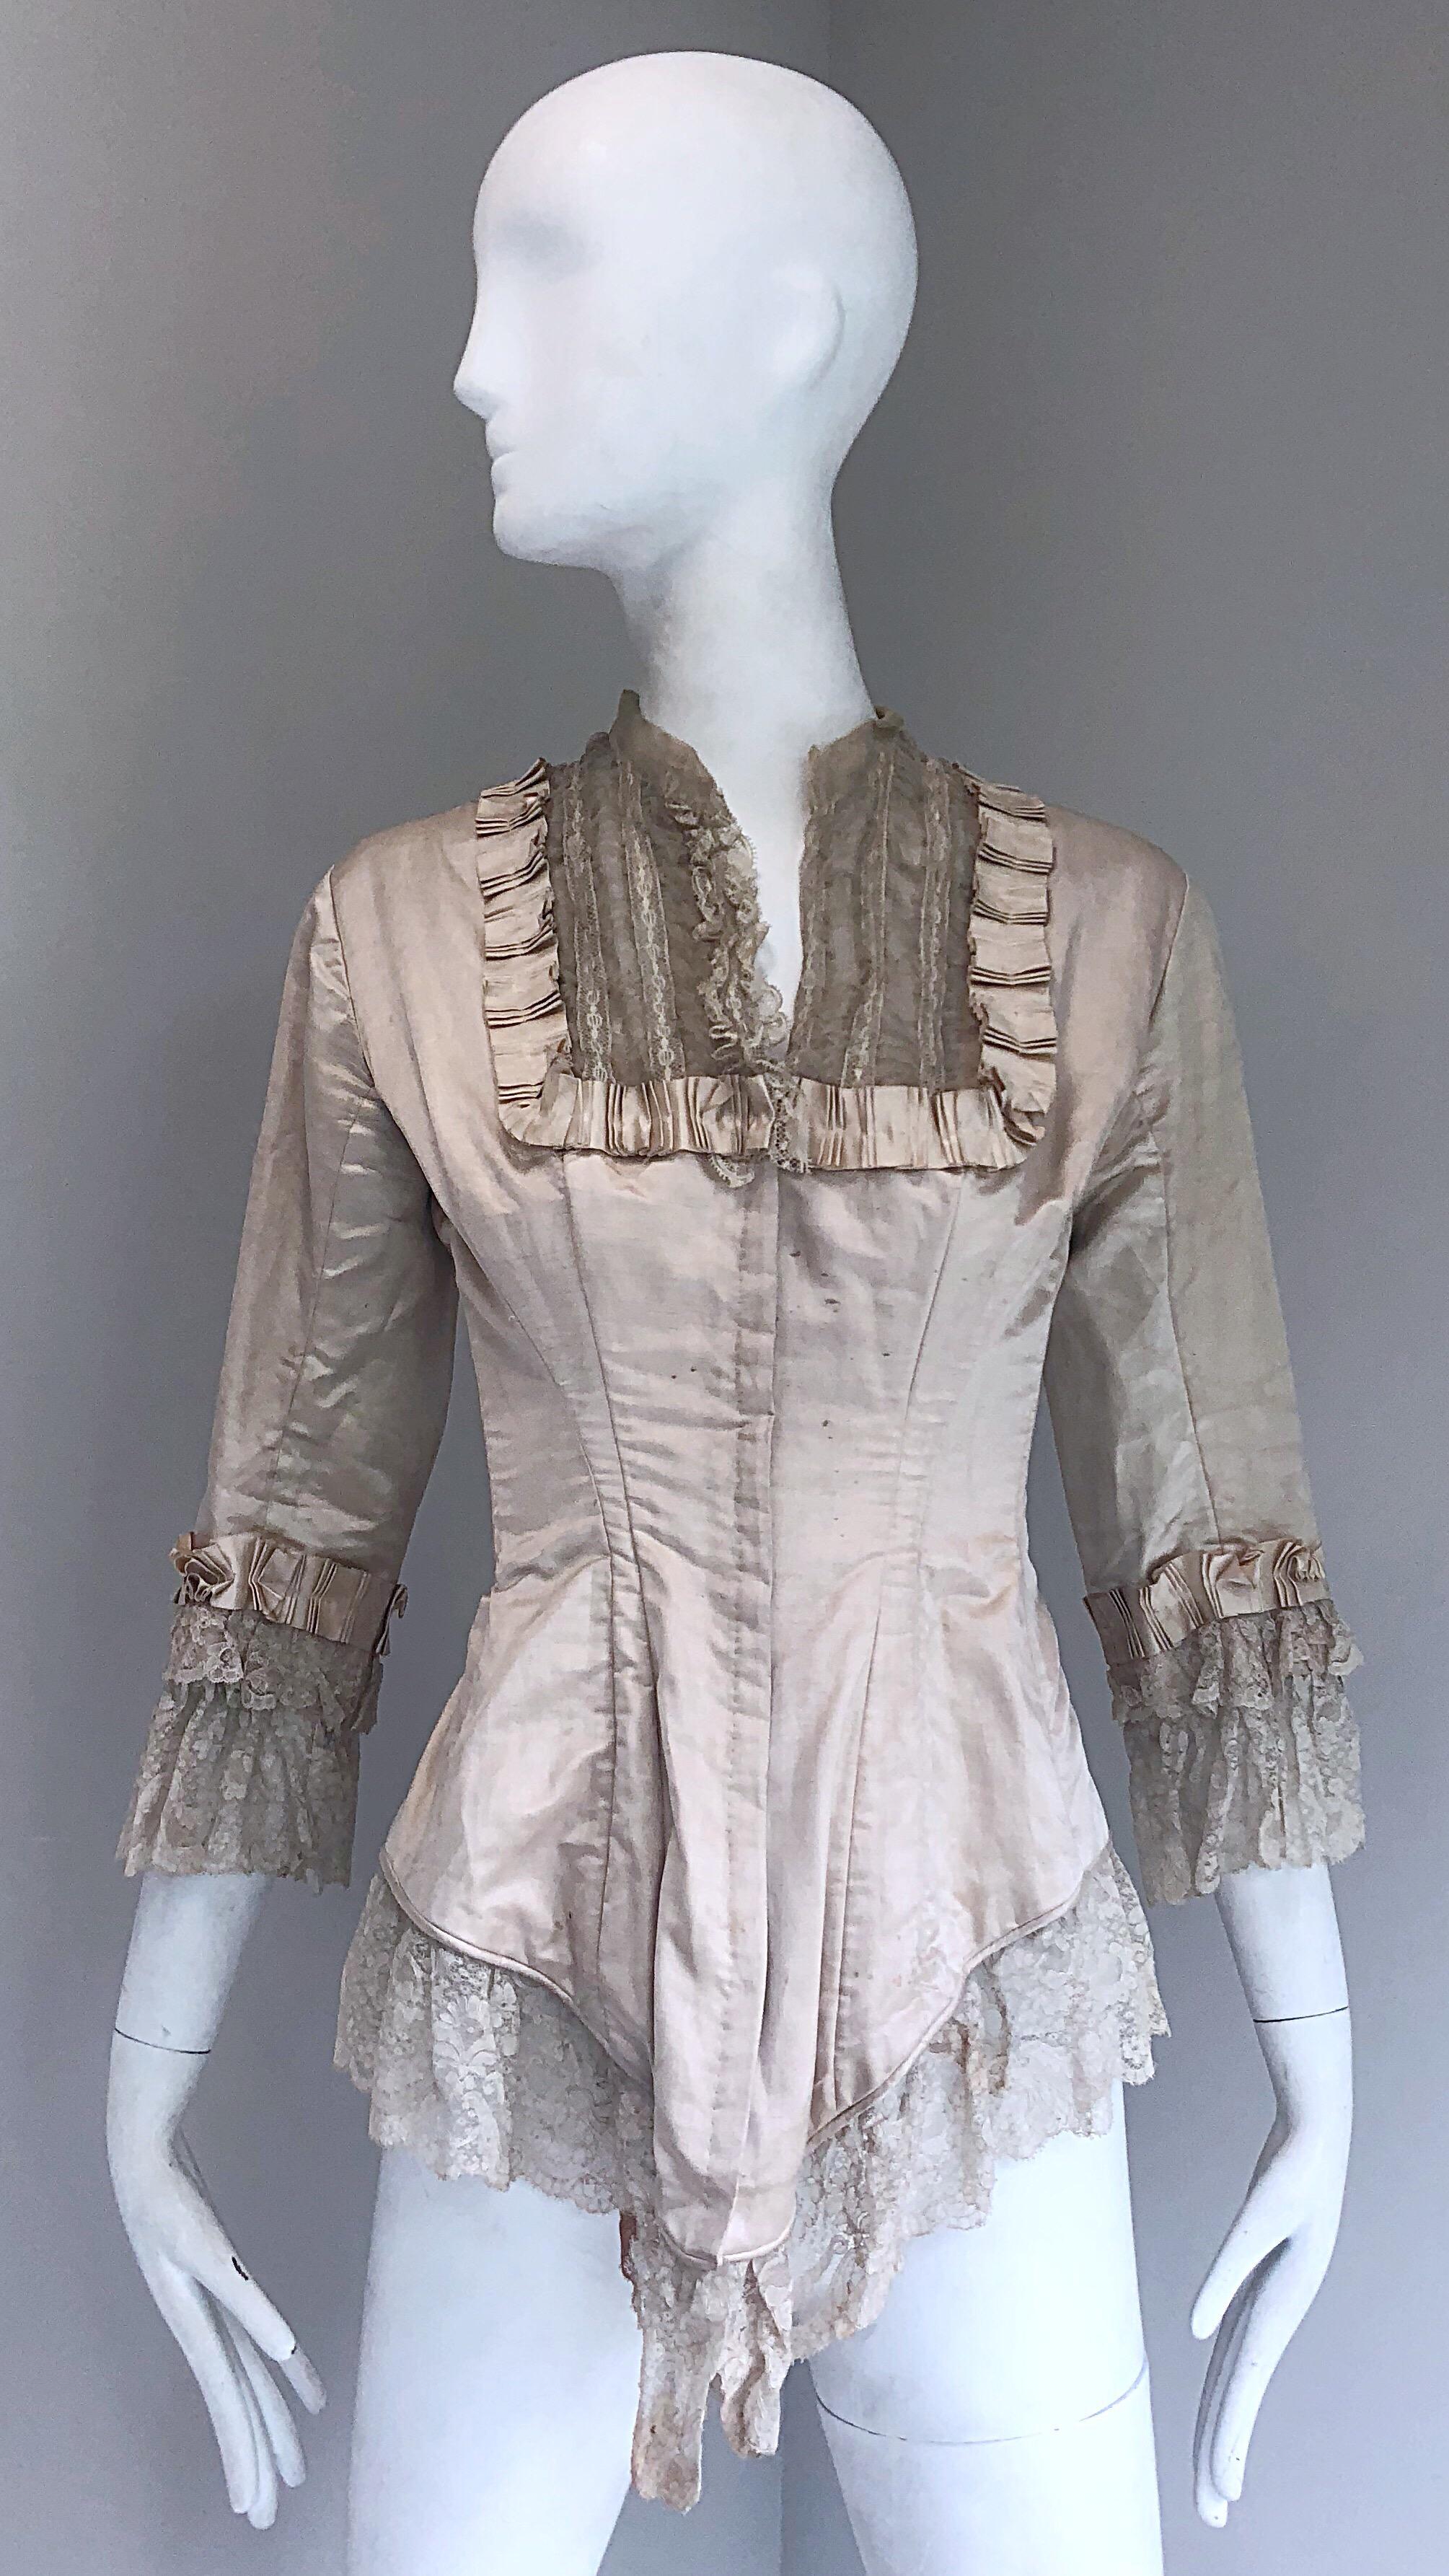 Incredible authentic Victorian Era (approximately 1880s) ivory silk lace corset bustier blouse! Features a fitted boned bodice with 
hook-and-eye closures up the front. Puckered silk details around the neck and sleeve cuffs. Layers of matching